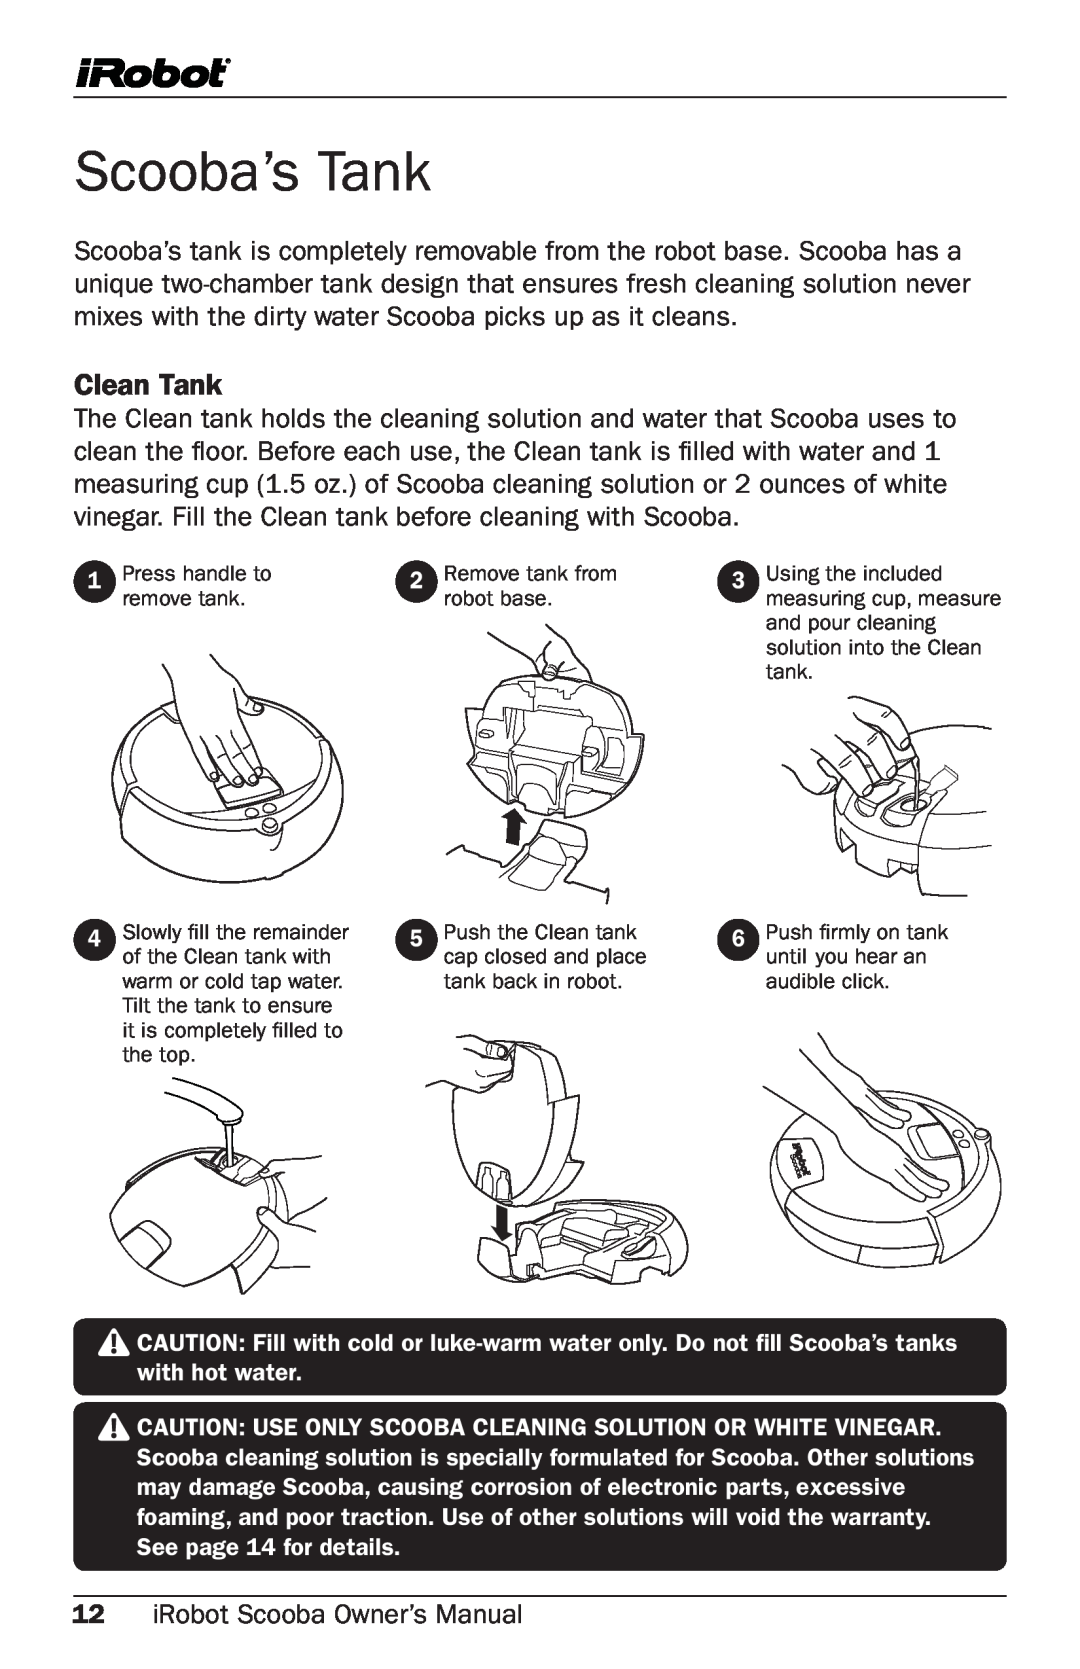 iRobot Cleaning System owner manual Scooba’s Tank, Clean Tank 